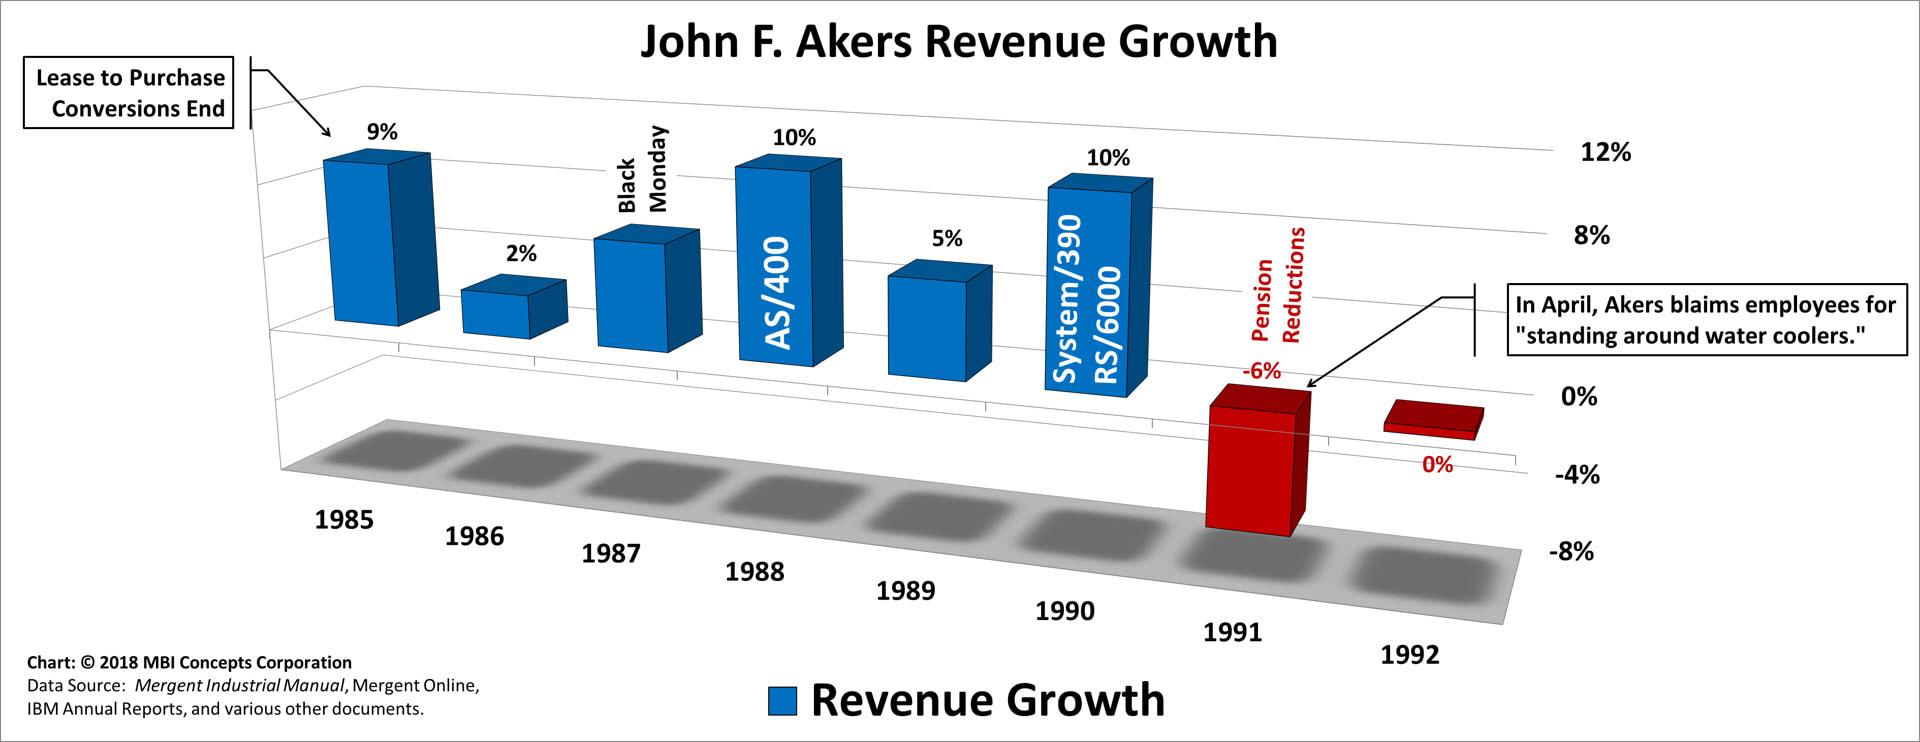 A color bar chart showing IBM's yearly revenue growth from 1985 to 1992 for John F. Akers.